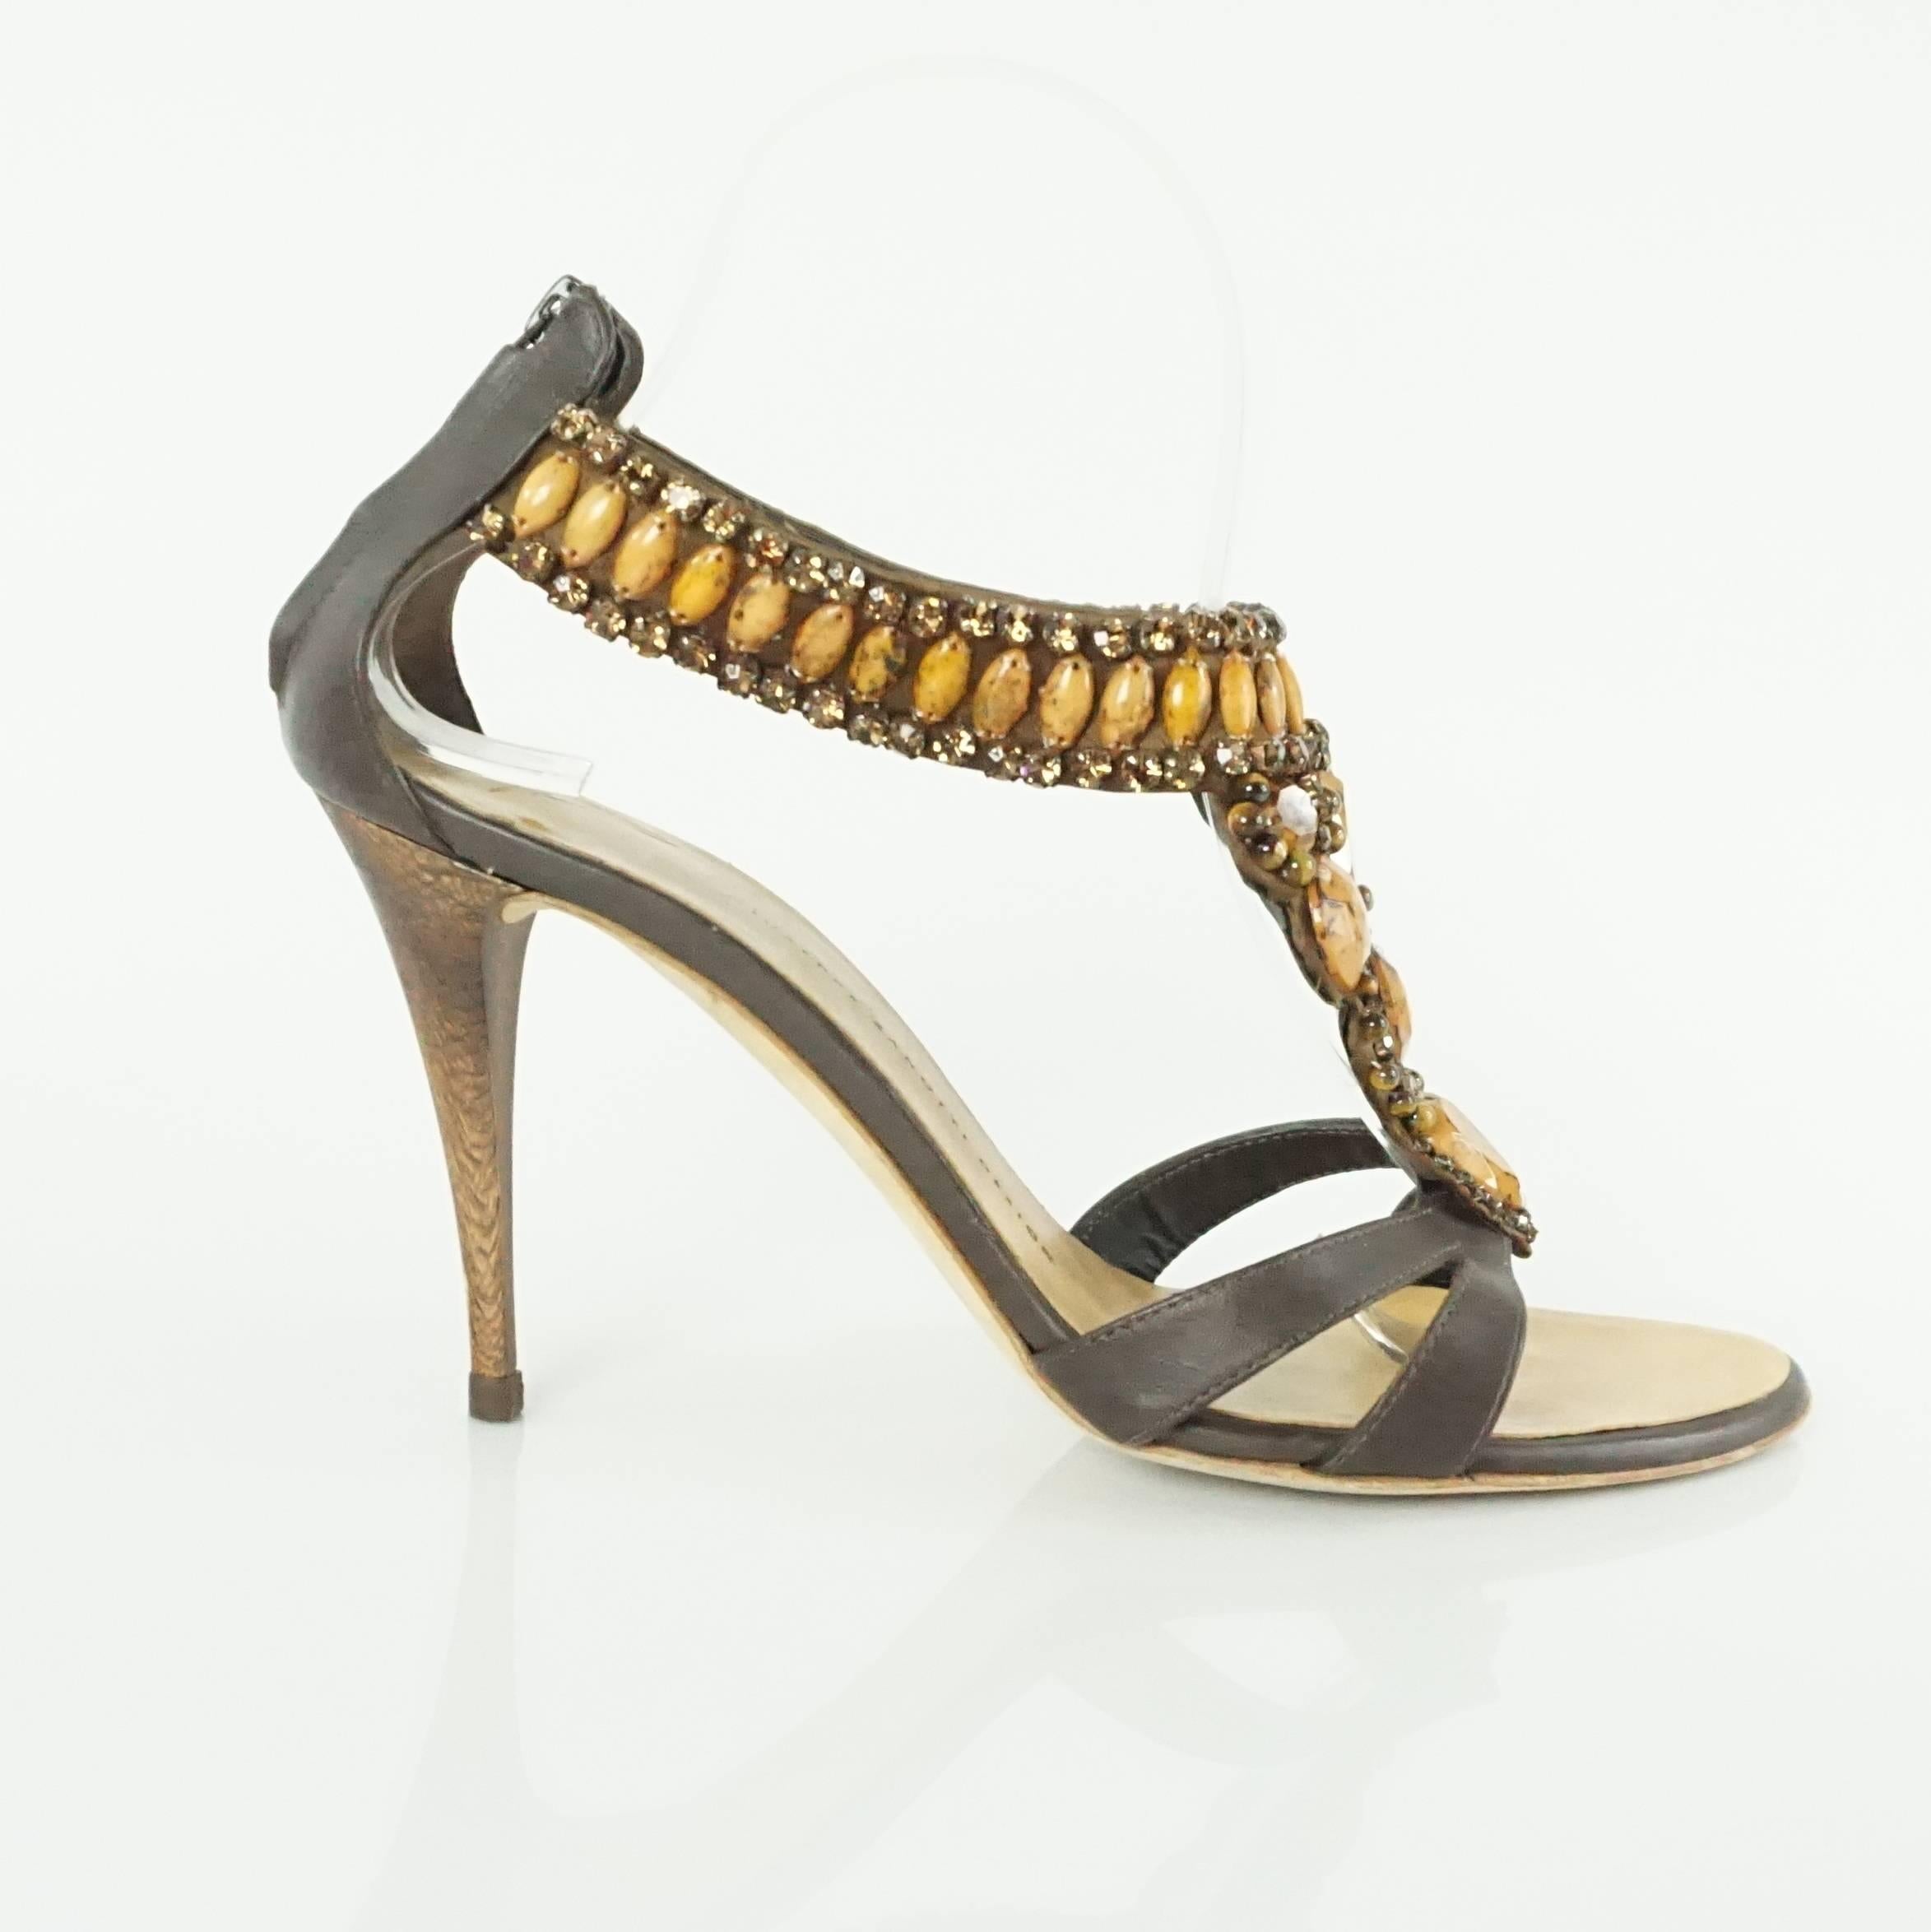 These Giuseppe Zanotti heeled sandals are a unique, stunning shoe. They feature caramel stones and bronze rhinestones, brown leather, an open toe, and a back zip at the ankle strap. They are in very good condition with some wear on the bottom, the